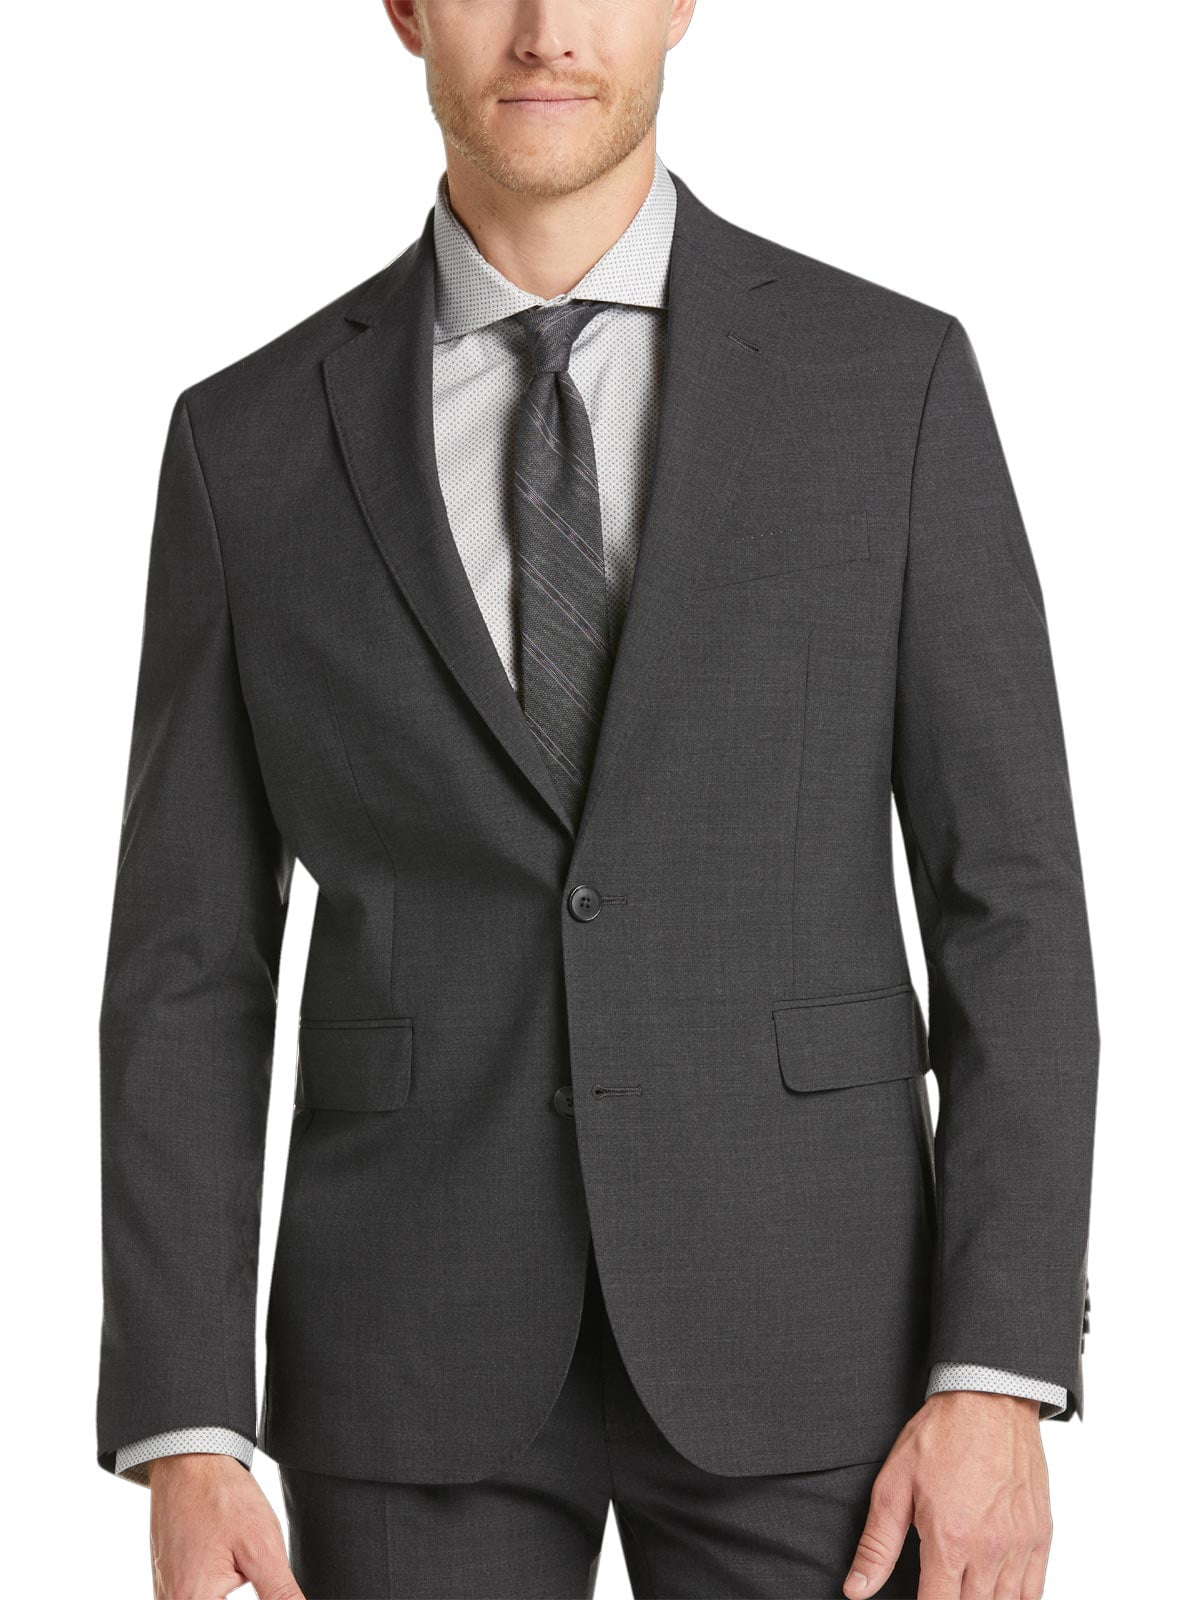 Cole Haan Mens  Wearable Technology Slim-Fit Suit Jacket 48R  Charcoal 